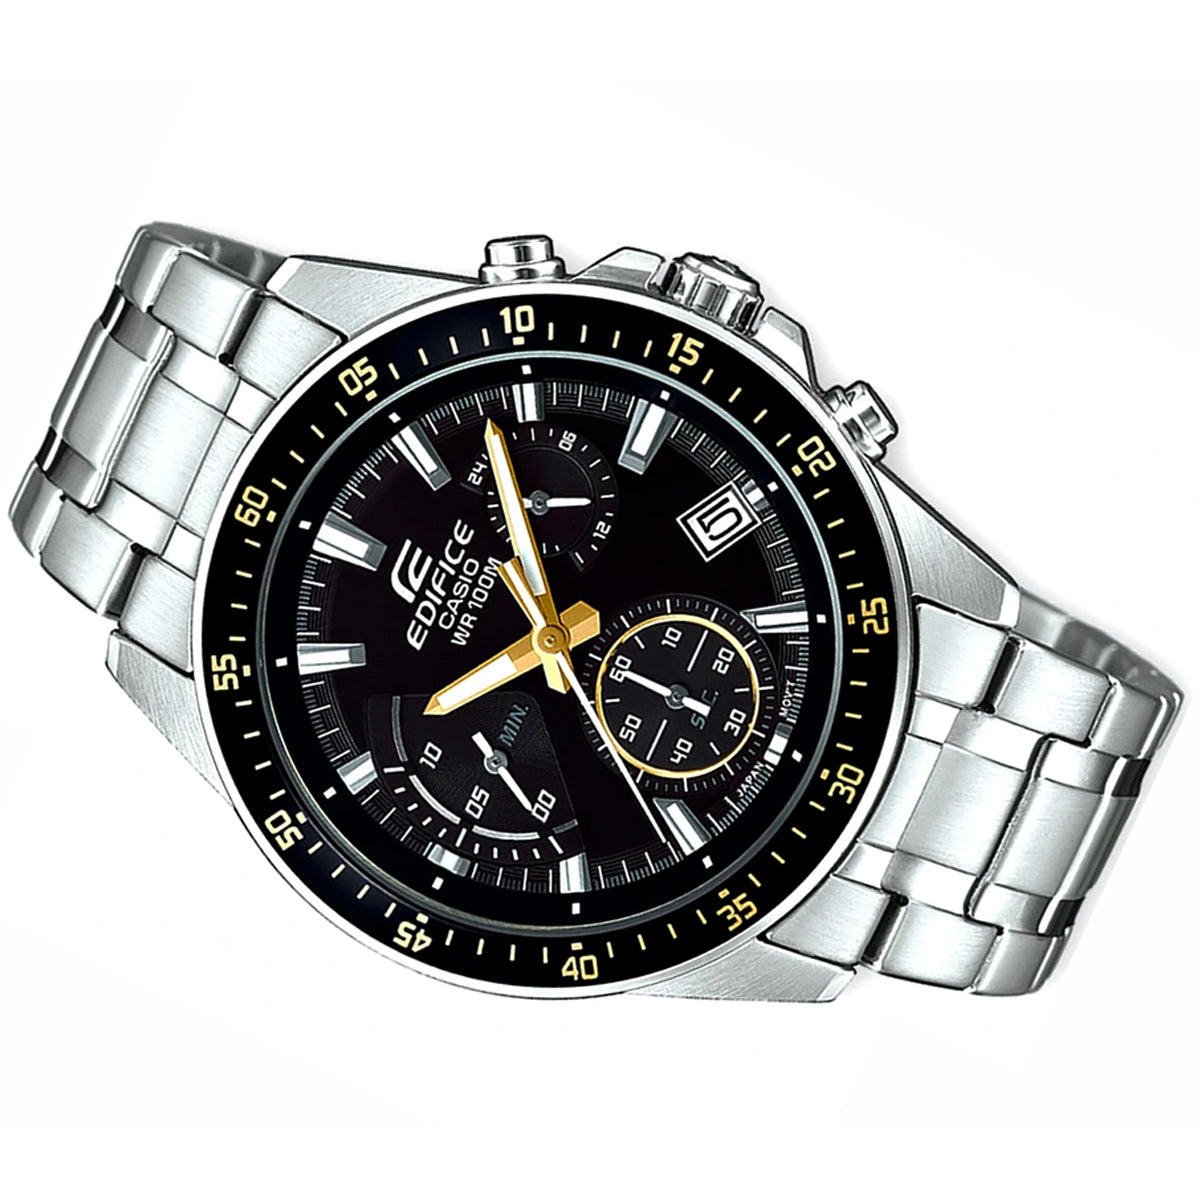 Casio Edifice EFV-540D-1A9 Chronograph Stainless Steel Strap Watch For Men-Watch Portal Philippines